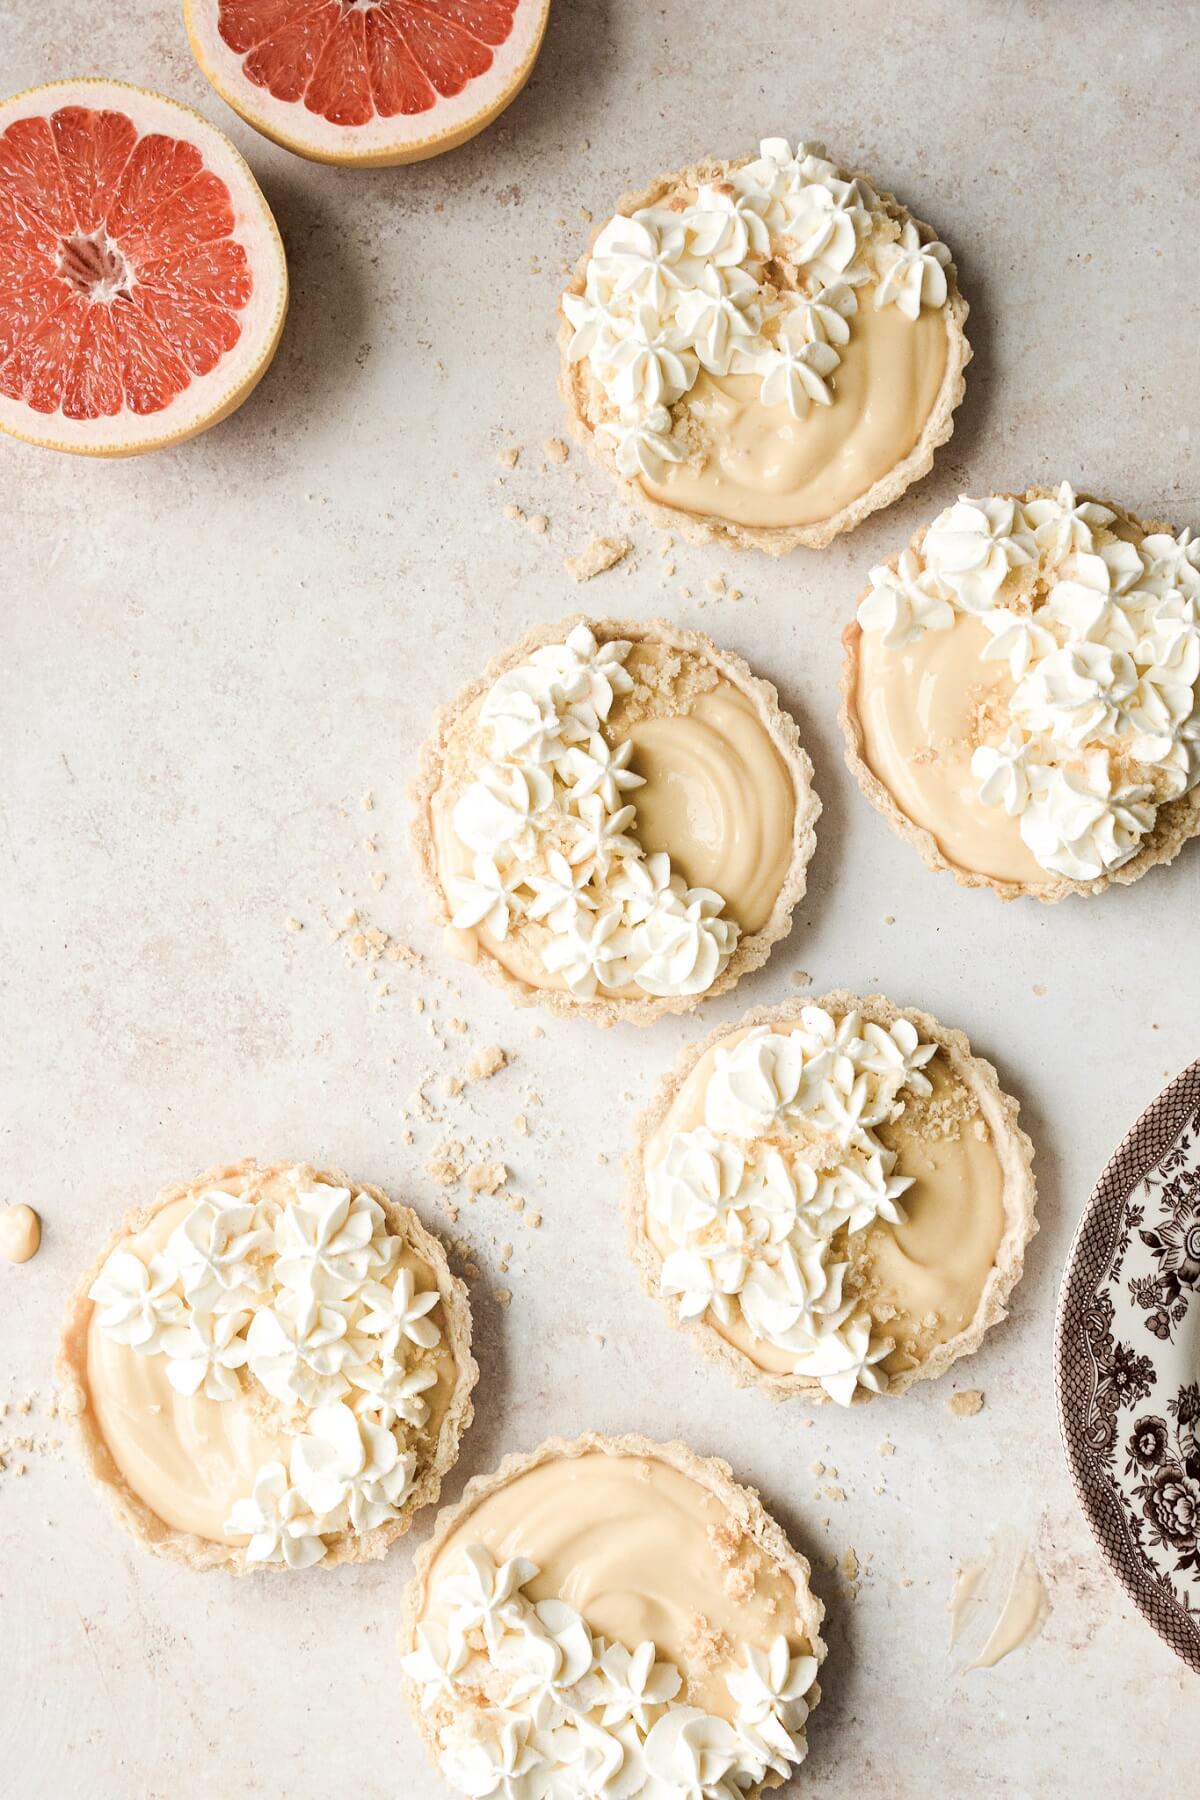 Grapefruit tarts with whipped cream cheese piped on top in drop flowers.